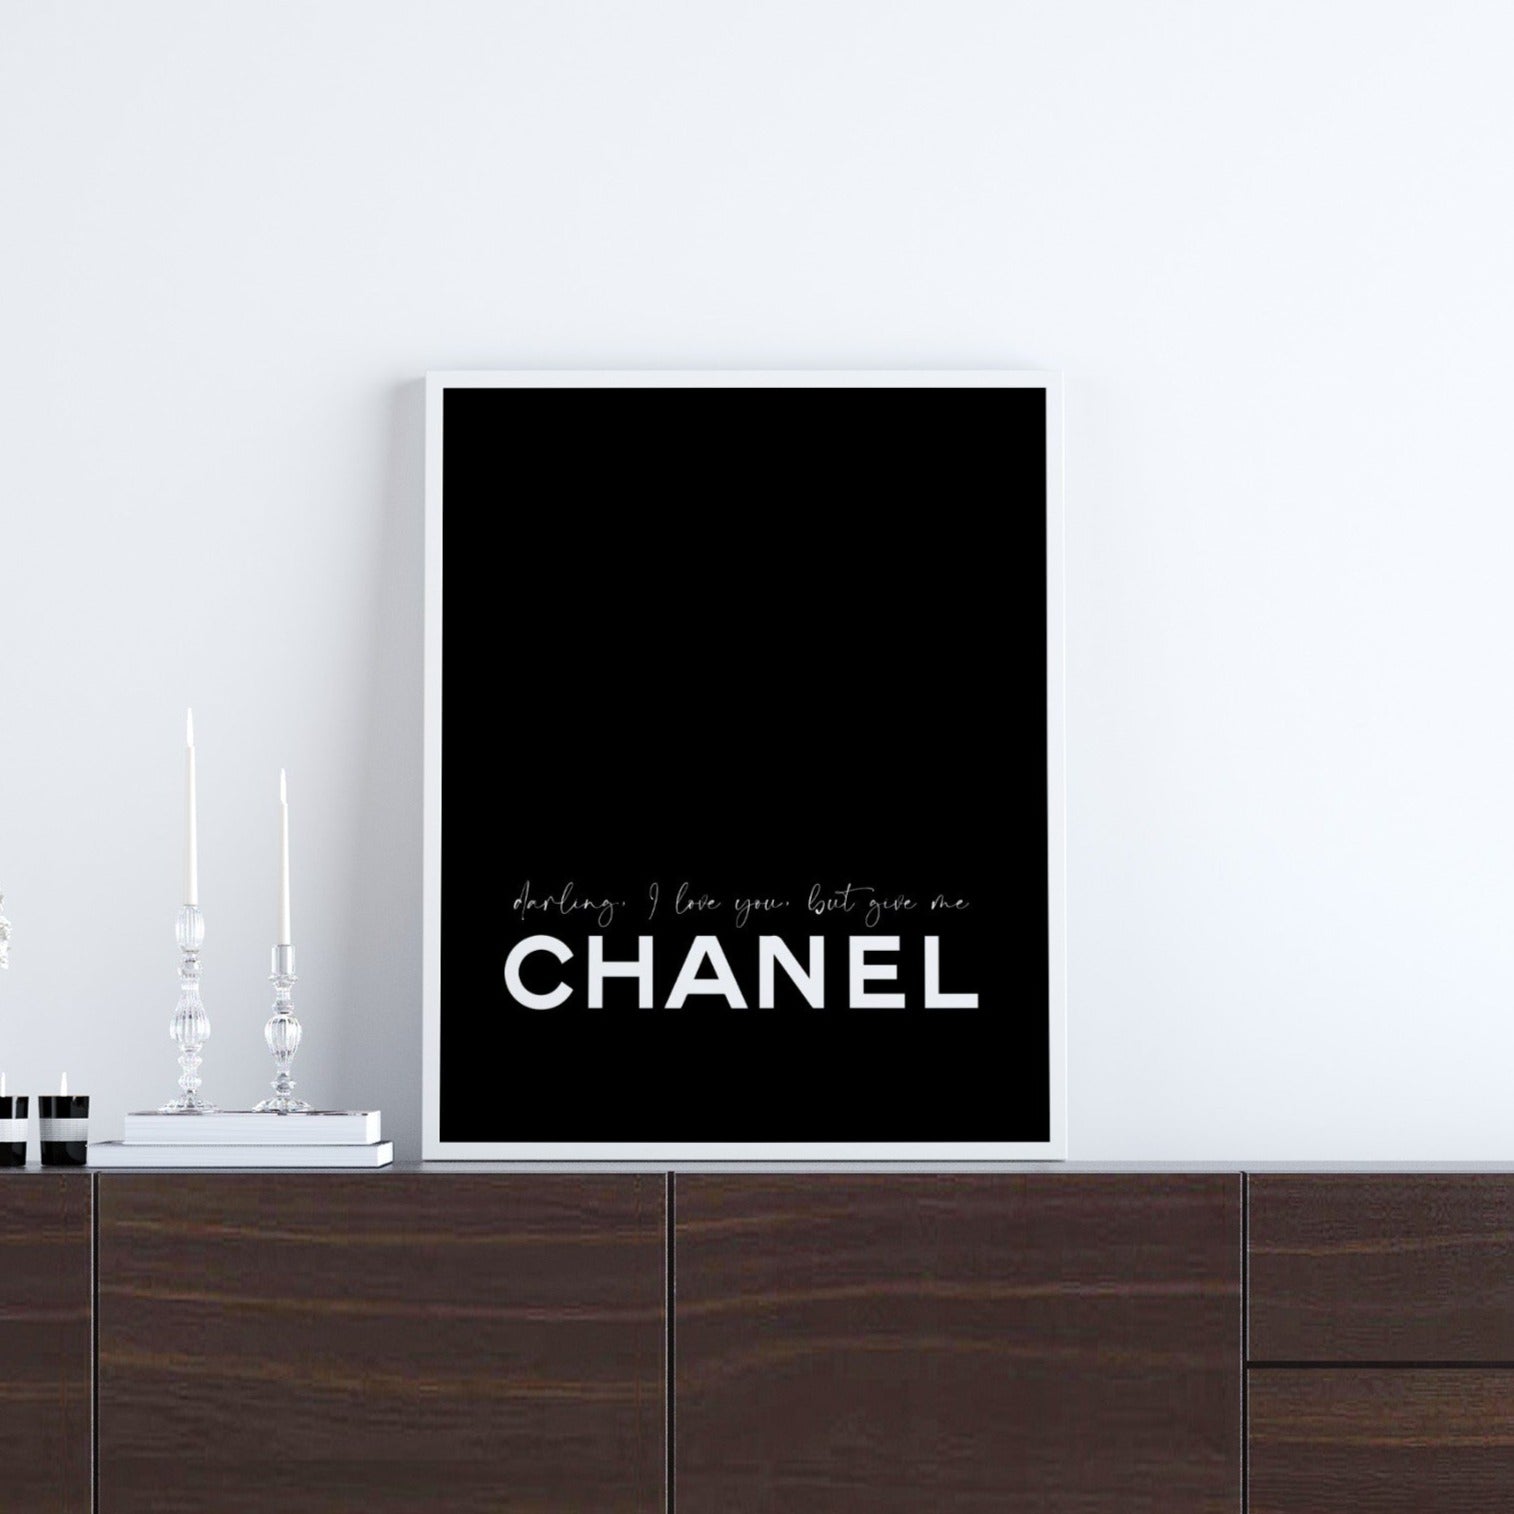 Coco Chanel quote poster